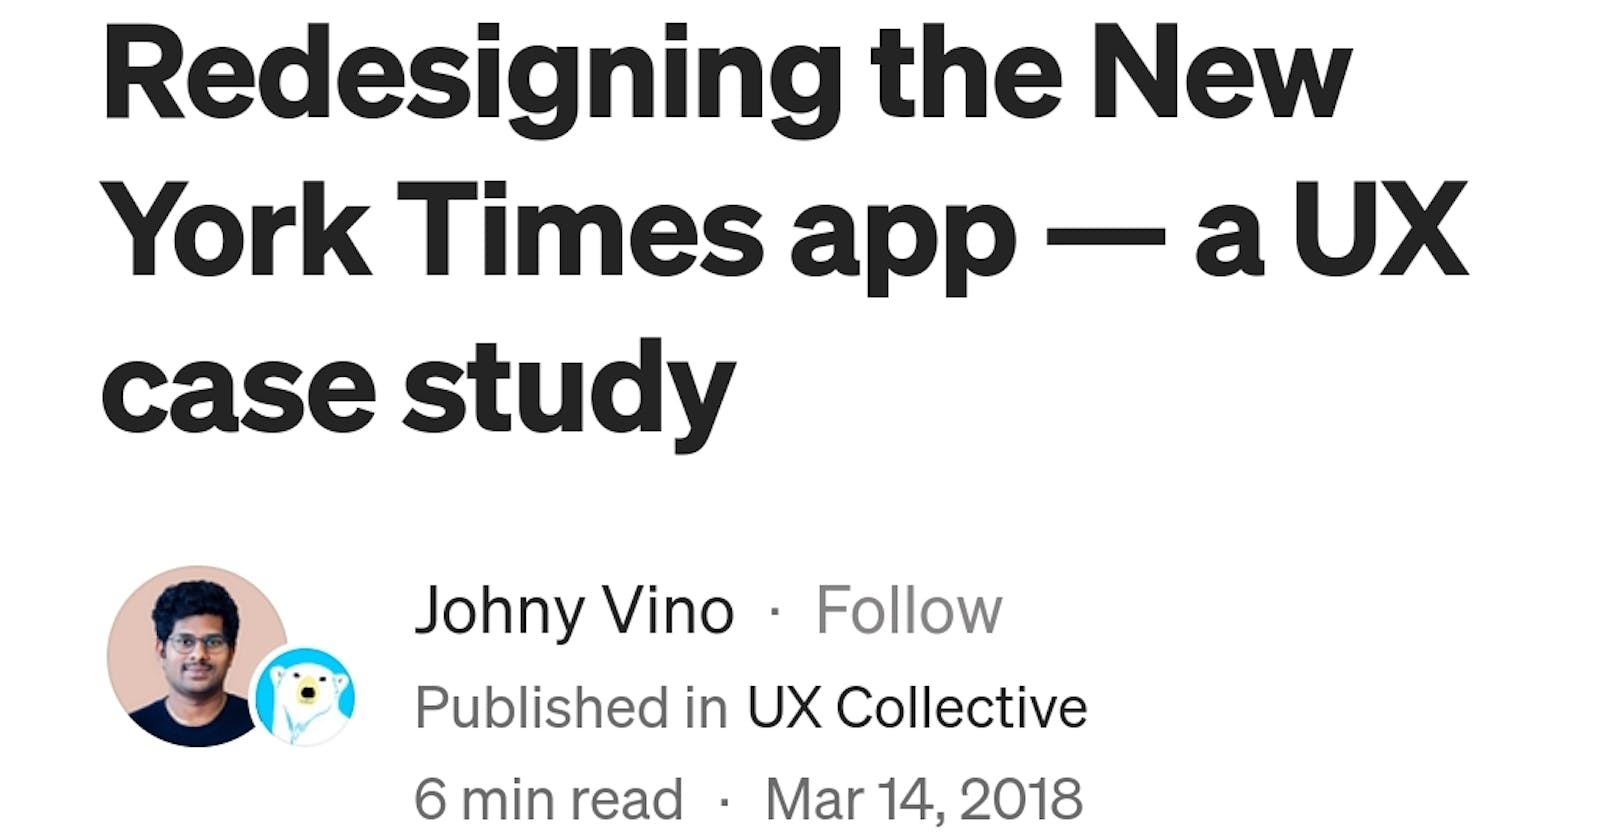 Thoughts on the redesign of the New York times app by Johnny Vino